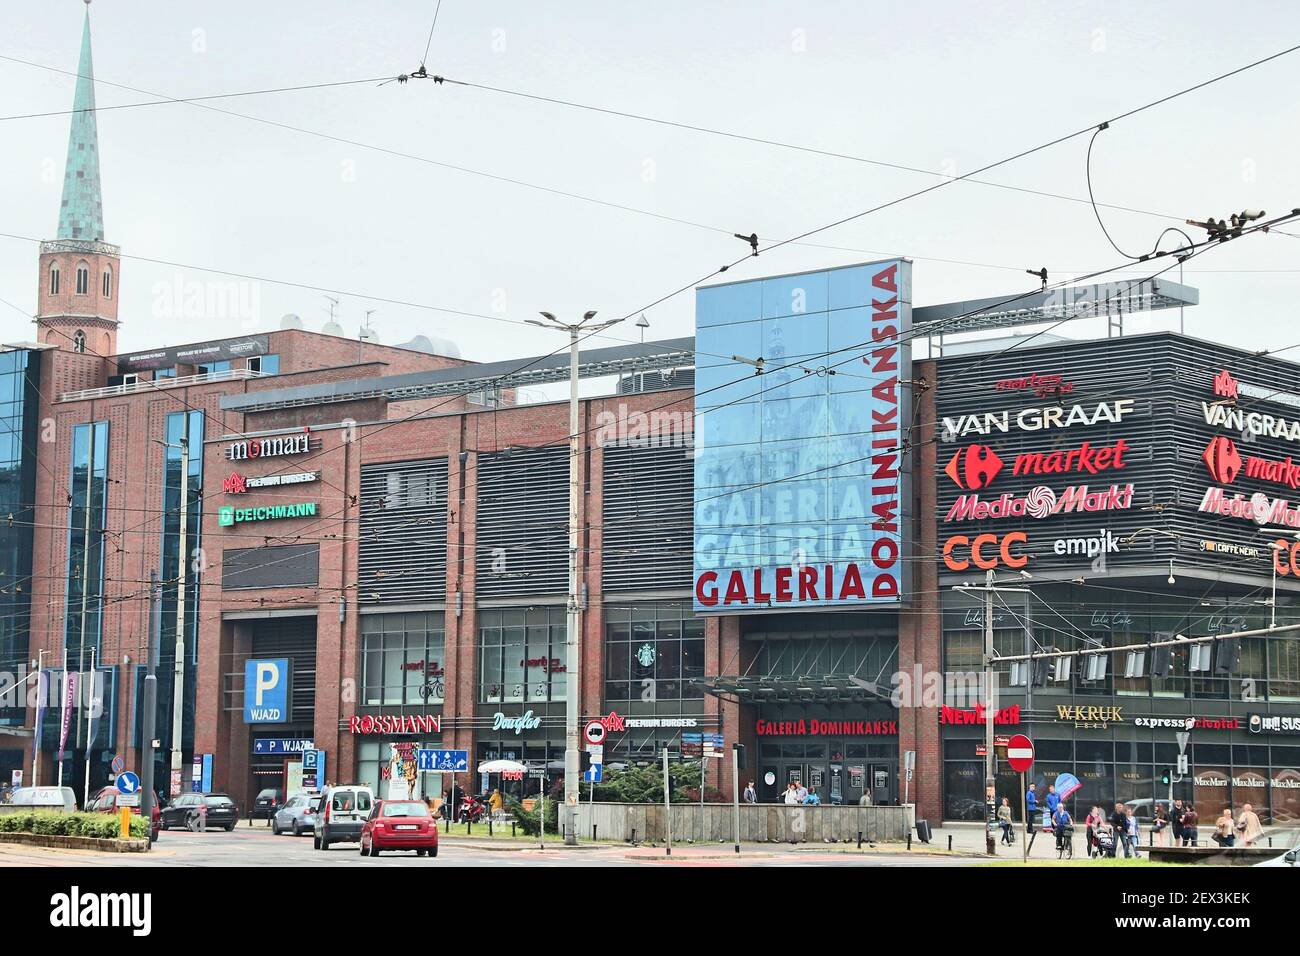 WROCLAW, POLAND - MAY 11, 2018: Galeria Dominikanska shopping mall in  Wroclaw, Poland. It is one of oldest malls in Wroclaw and has 100 stores  Stock Photo - Alamy